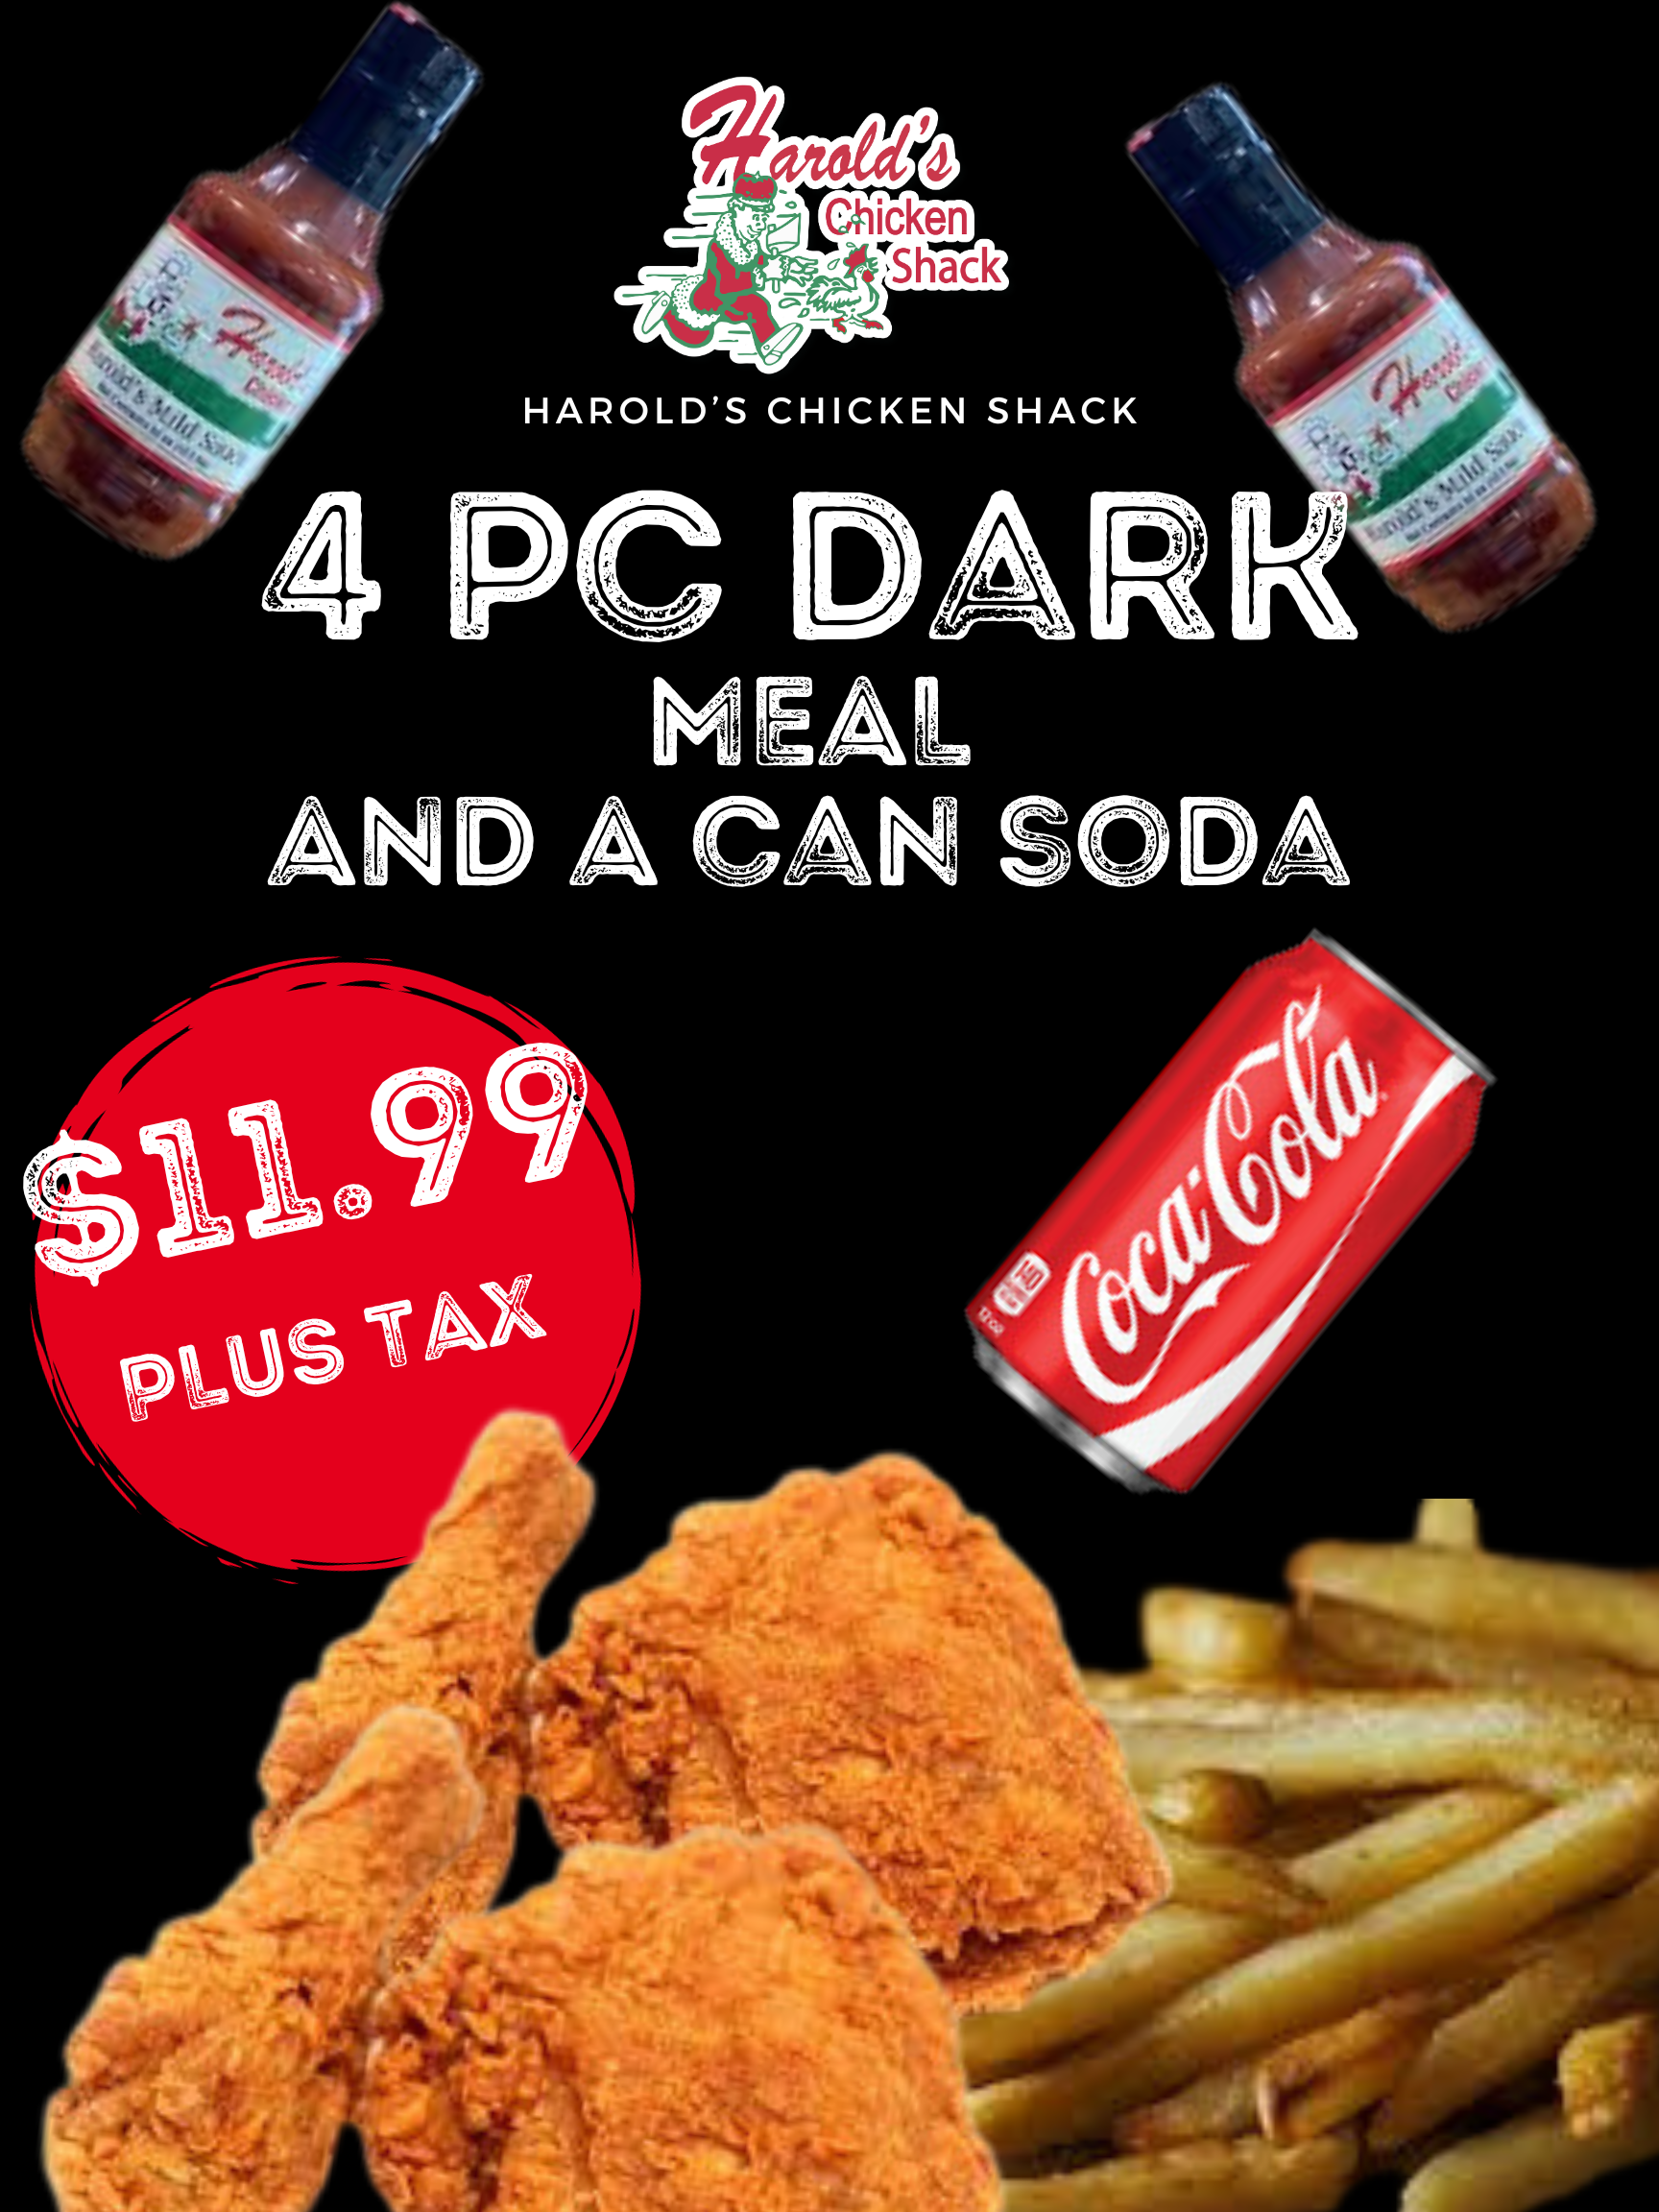 4 PIECE DARK WITH FRIES AND CAN SODA